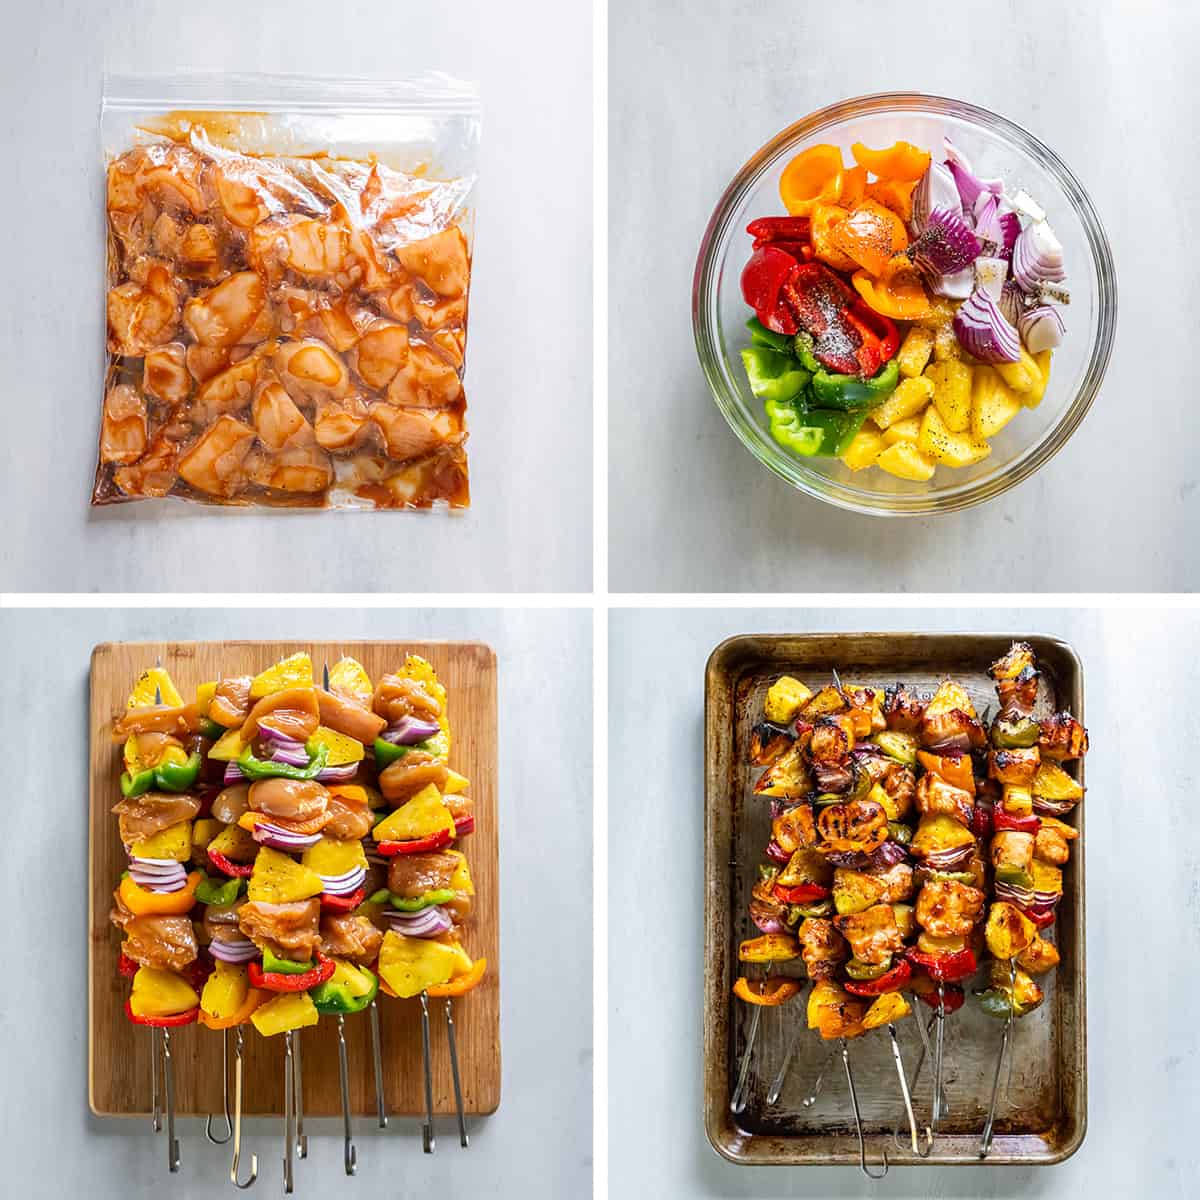 Chicken and marinade in a plastic bag and on skewers with pineapple and bell peppers.